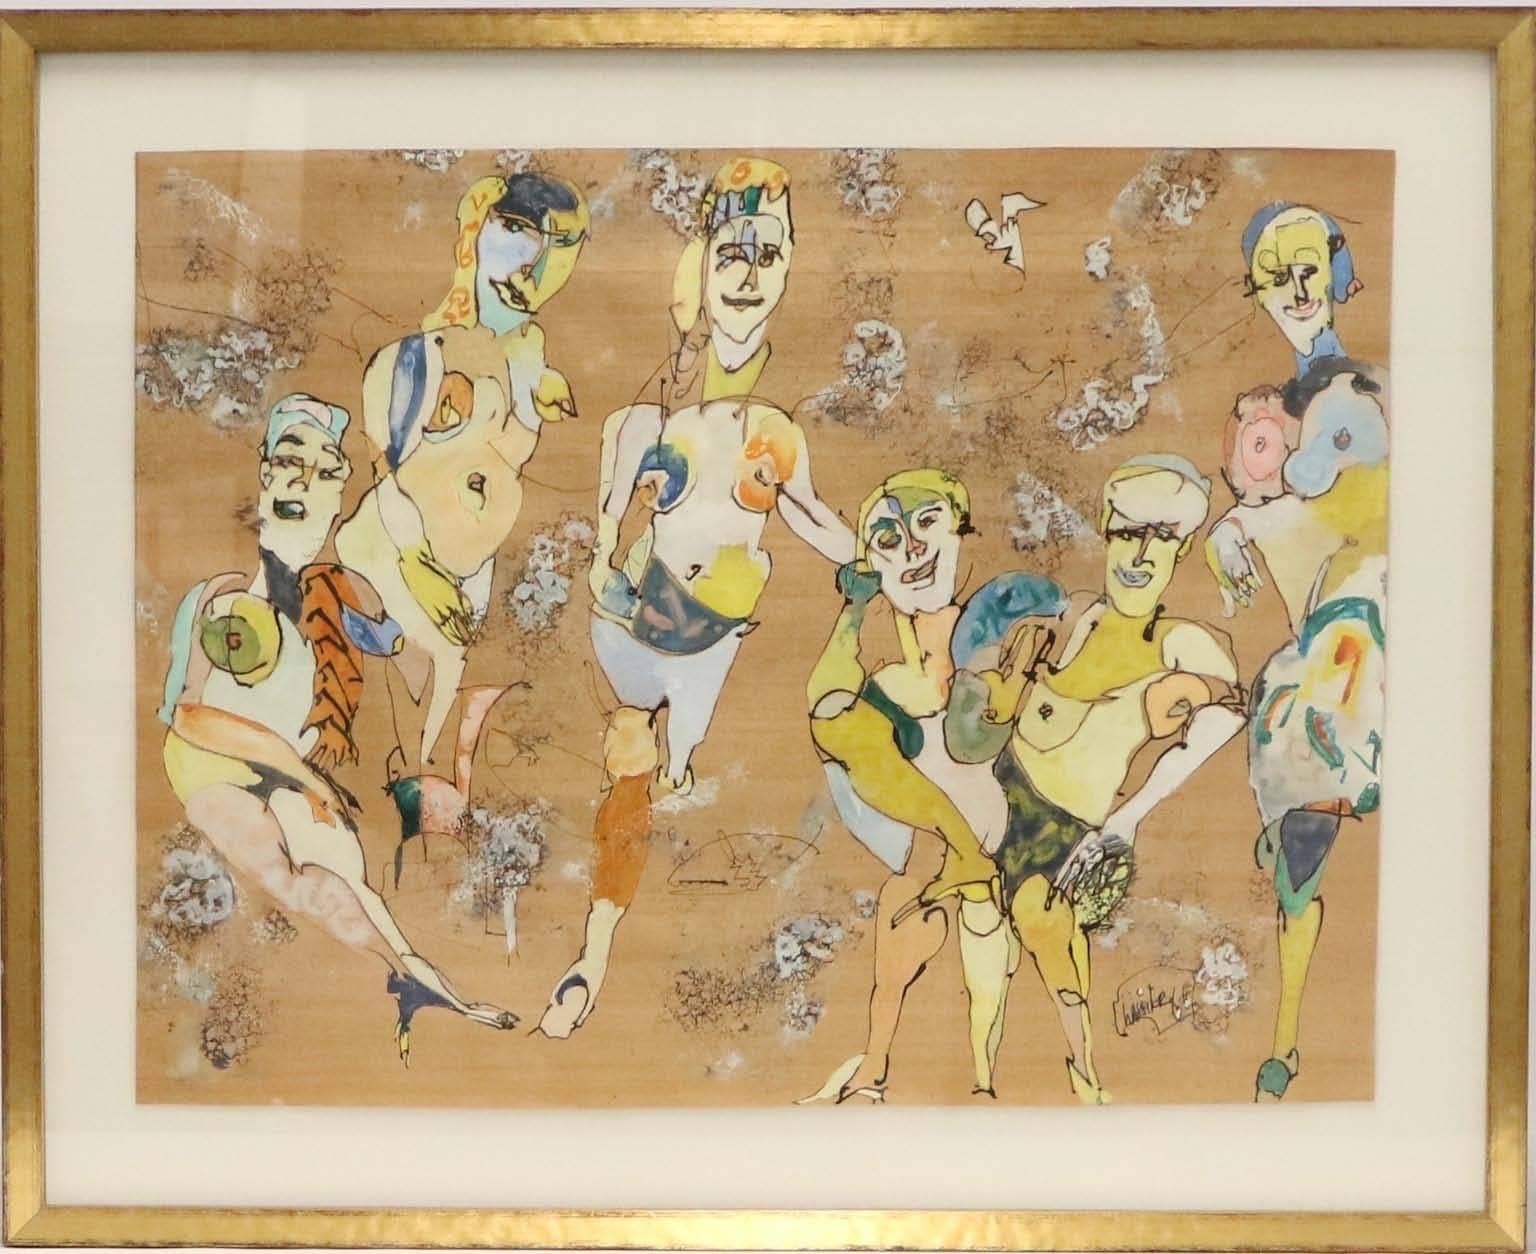 A mixed media on wood by Charles Keeling Lassiter (1926-2005), produced circa 1960s, depicting a gathering of abstract nude figures. Markings include the artist's signature and date [Lassiter/ '66] to the lower right corner. 

When Lassiter broke